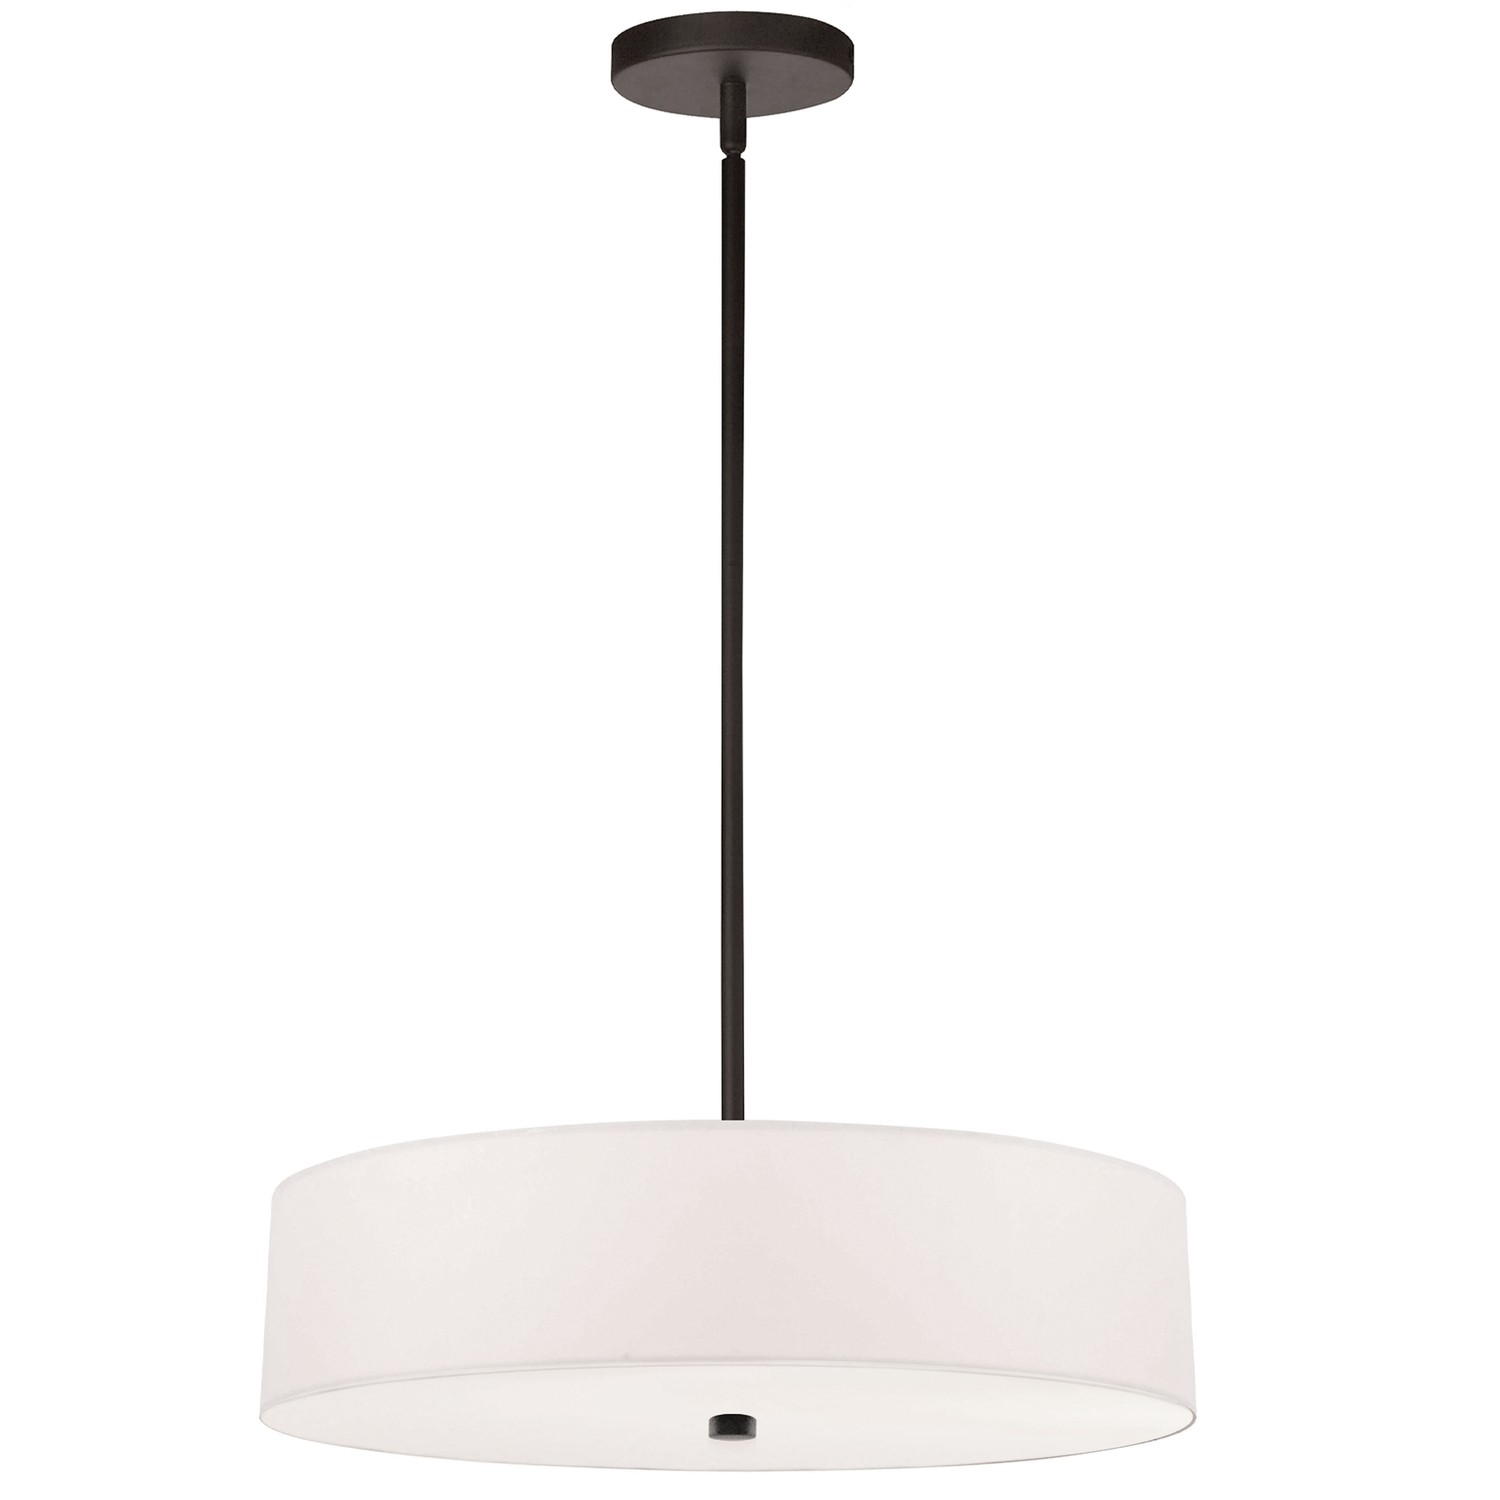 4 Light Incandescent Pendant, Matte Black with White Shade     (571-204P-MB-WH)